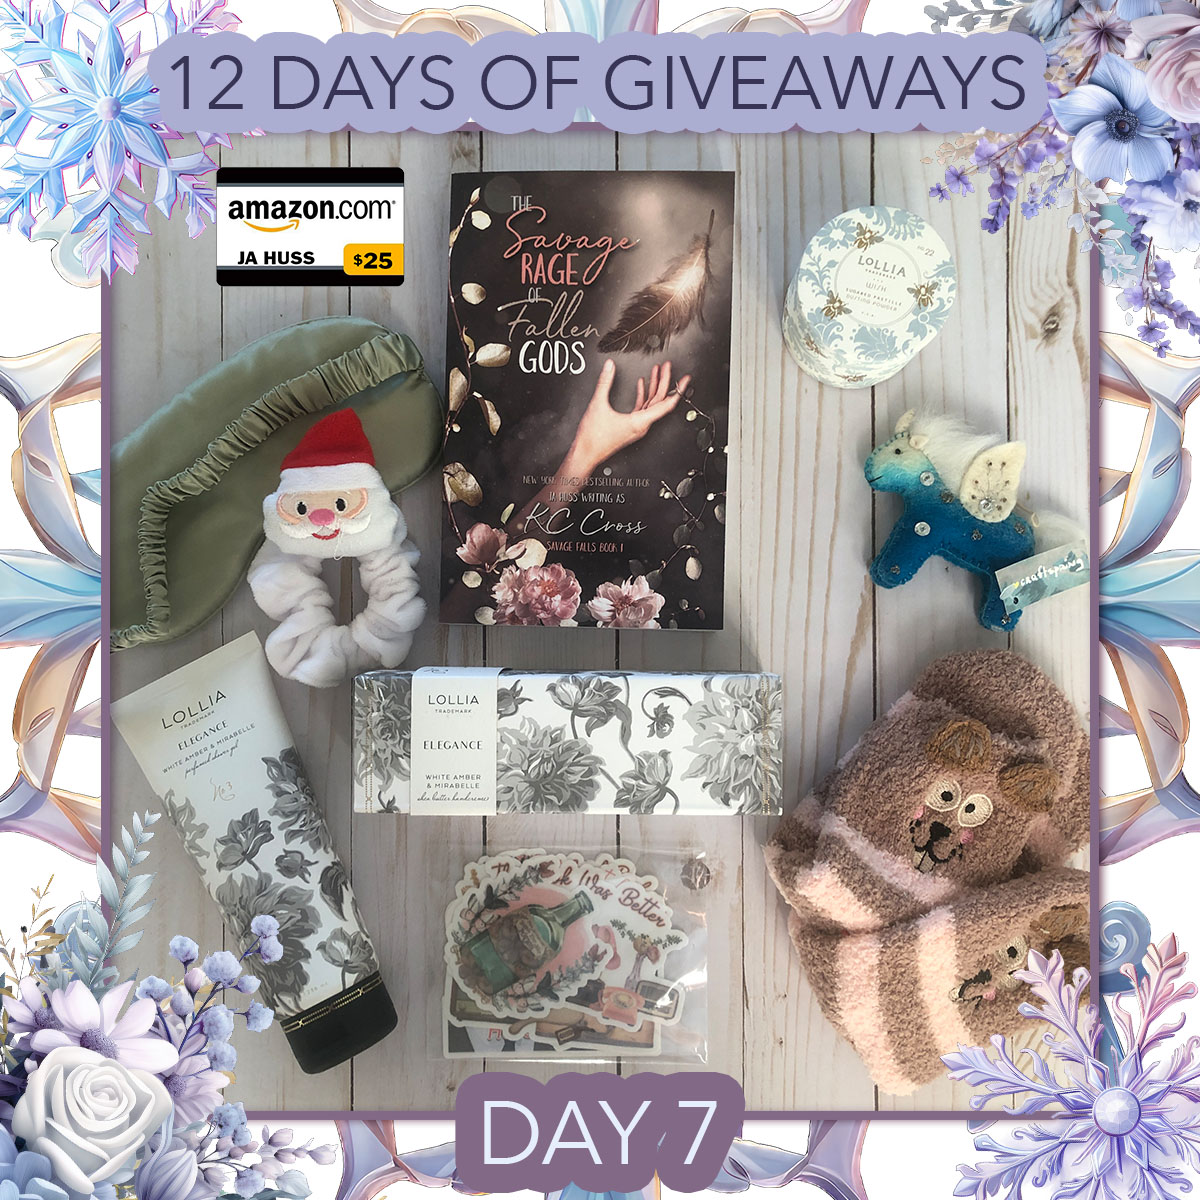 CLOSED - To say that day 6 of our 12 Days of Giveaways is HUGE